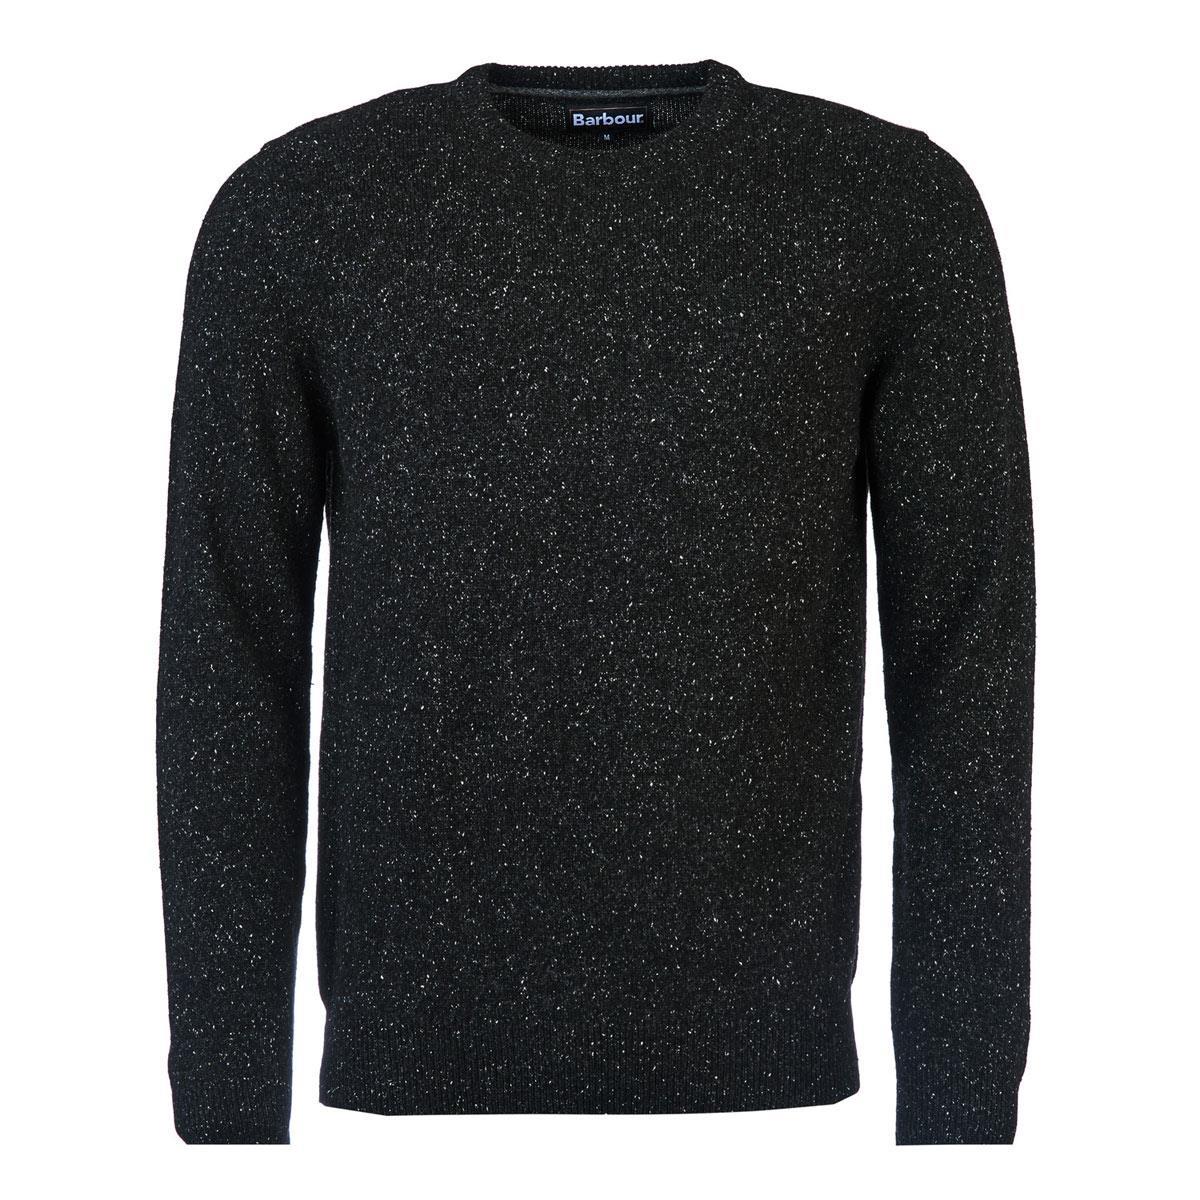 What are some ways to style the Barbour Tisbury Crew Neck Sweater?